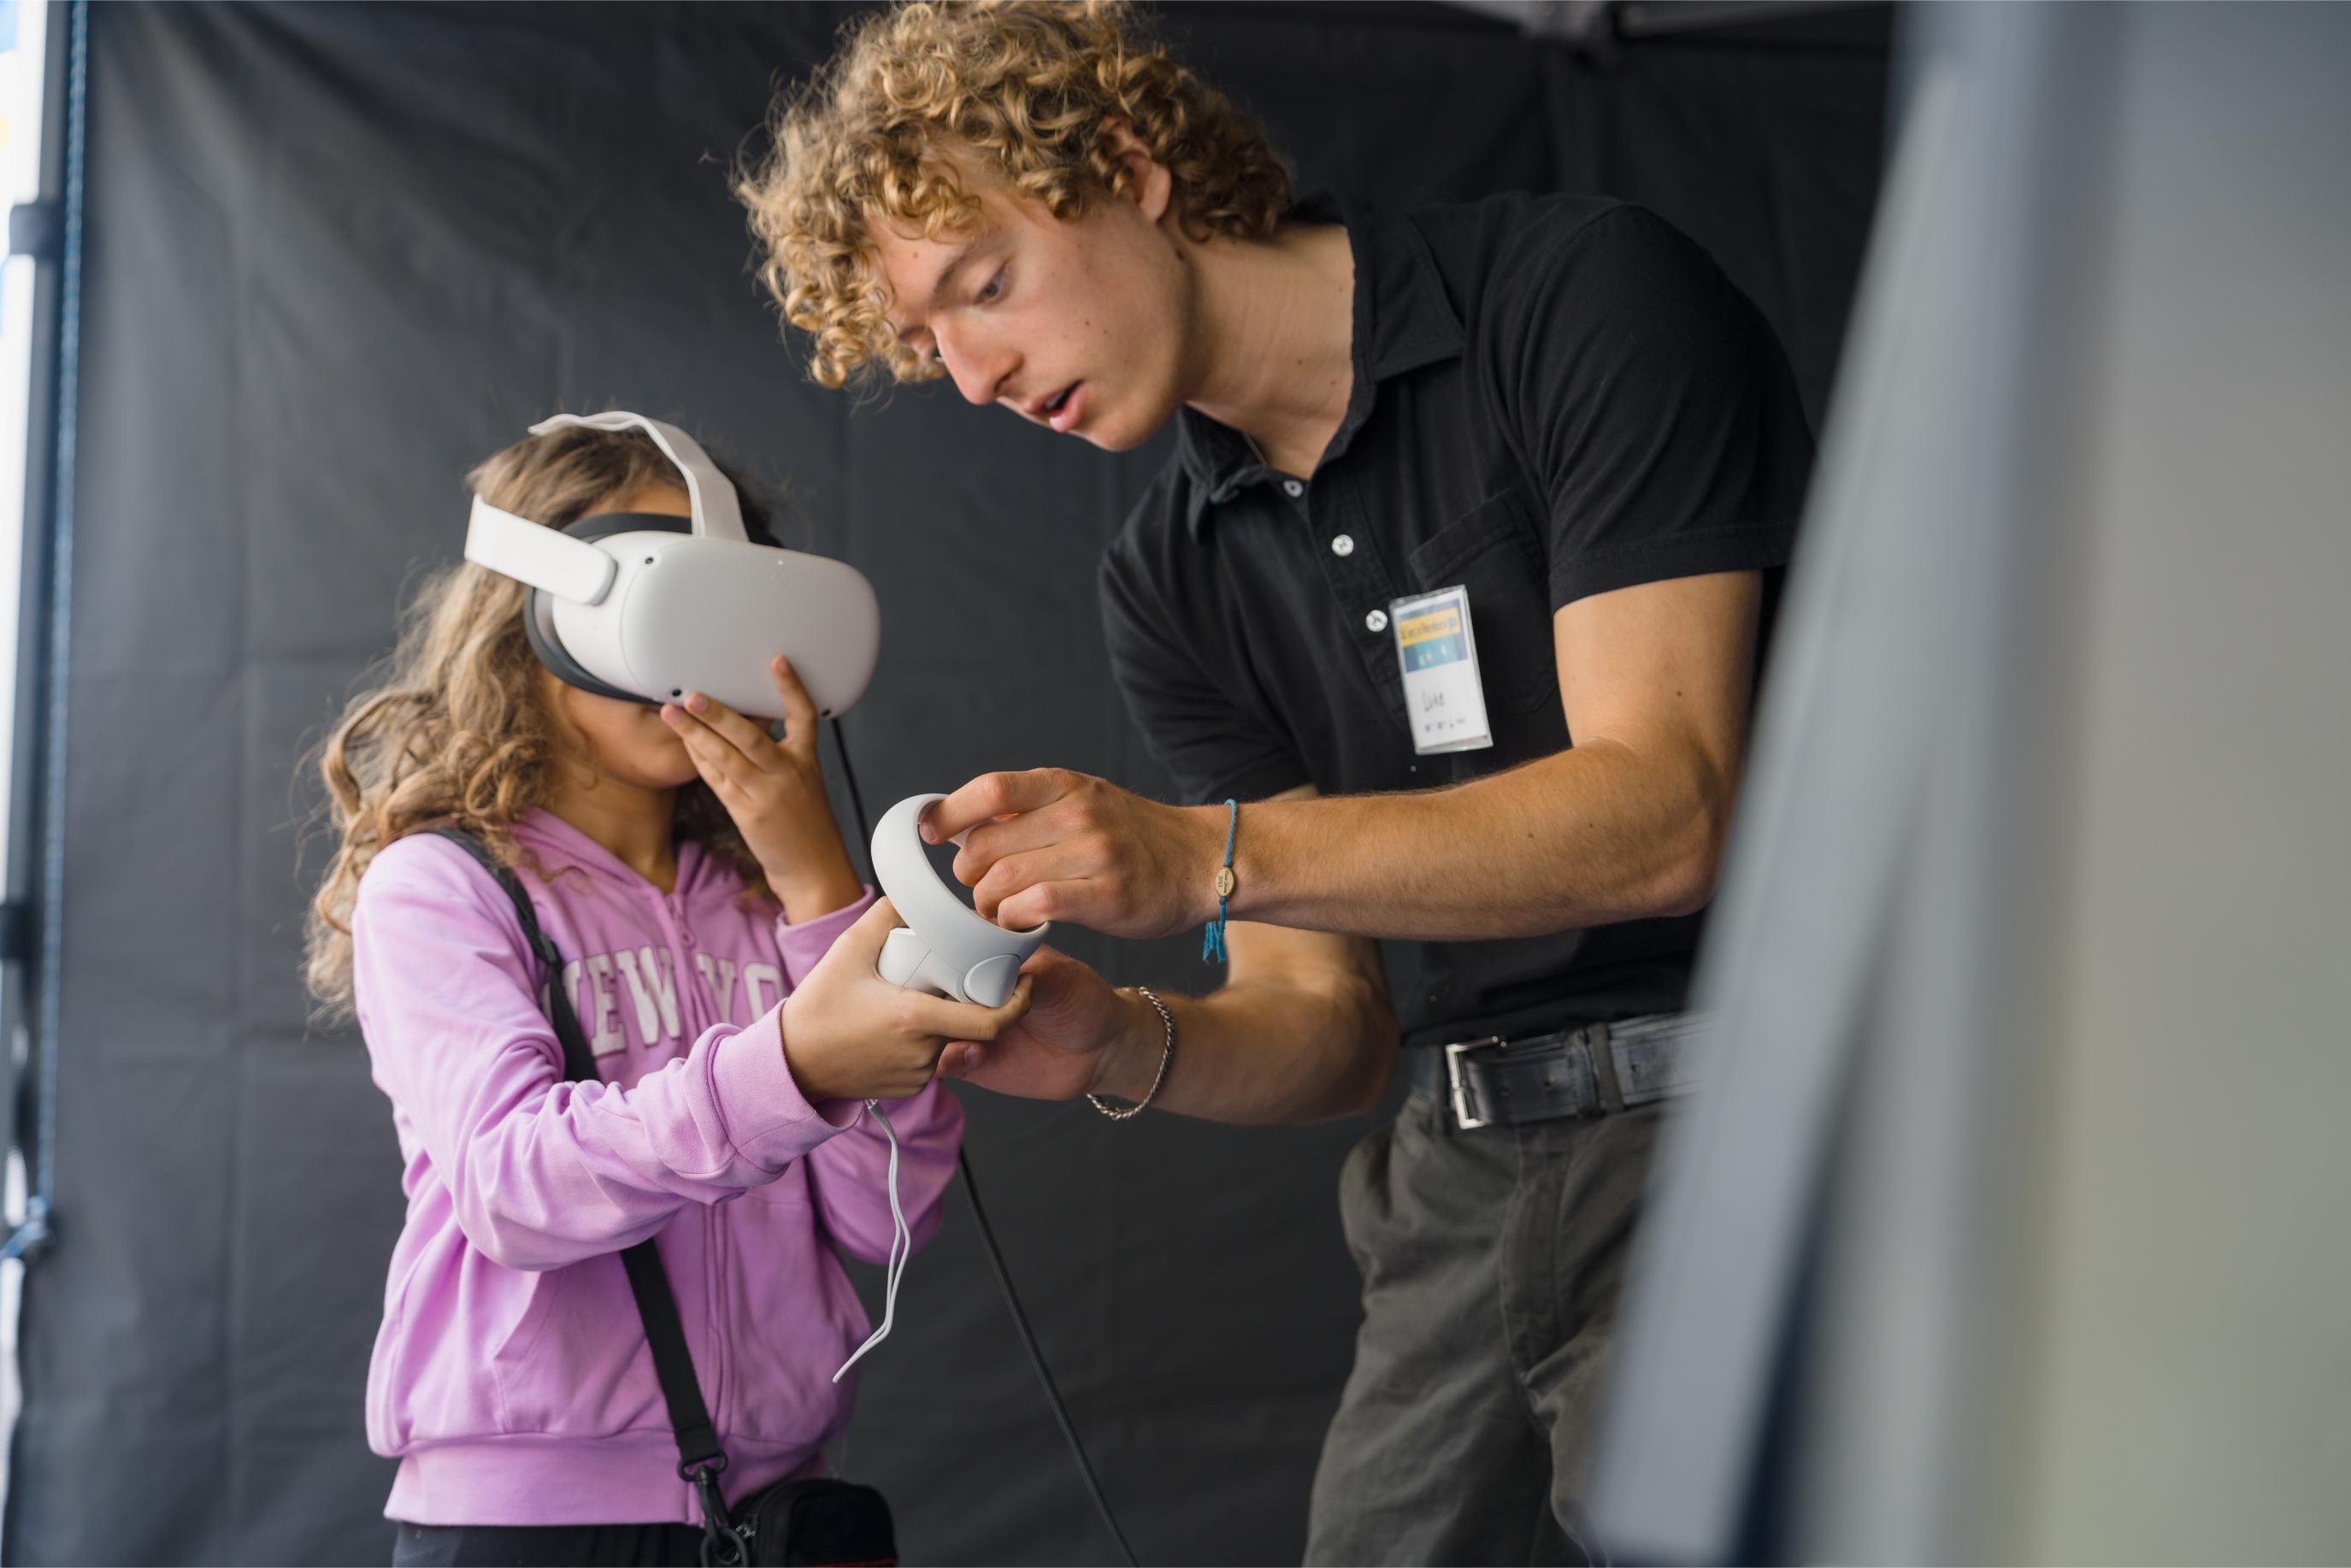 A volunteer shows the young participant how to use the controller at the Virtual Reality Games Booth.